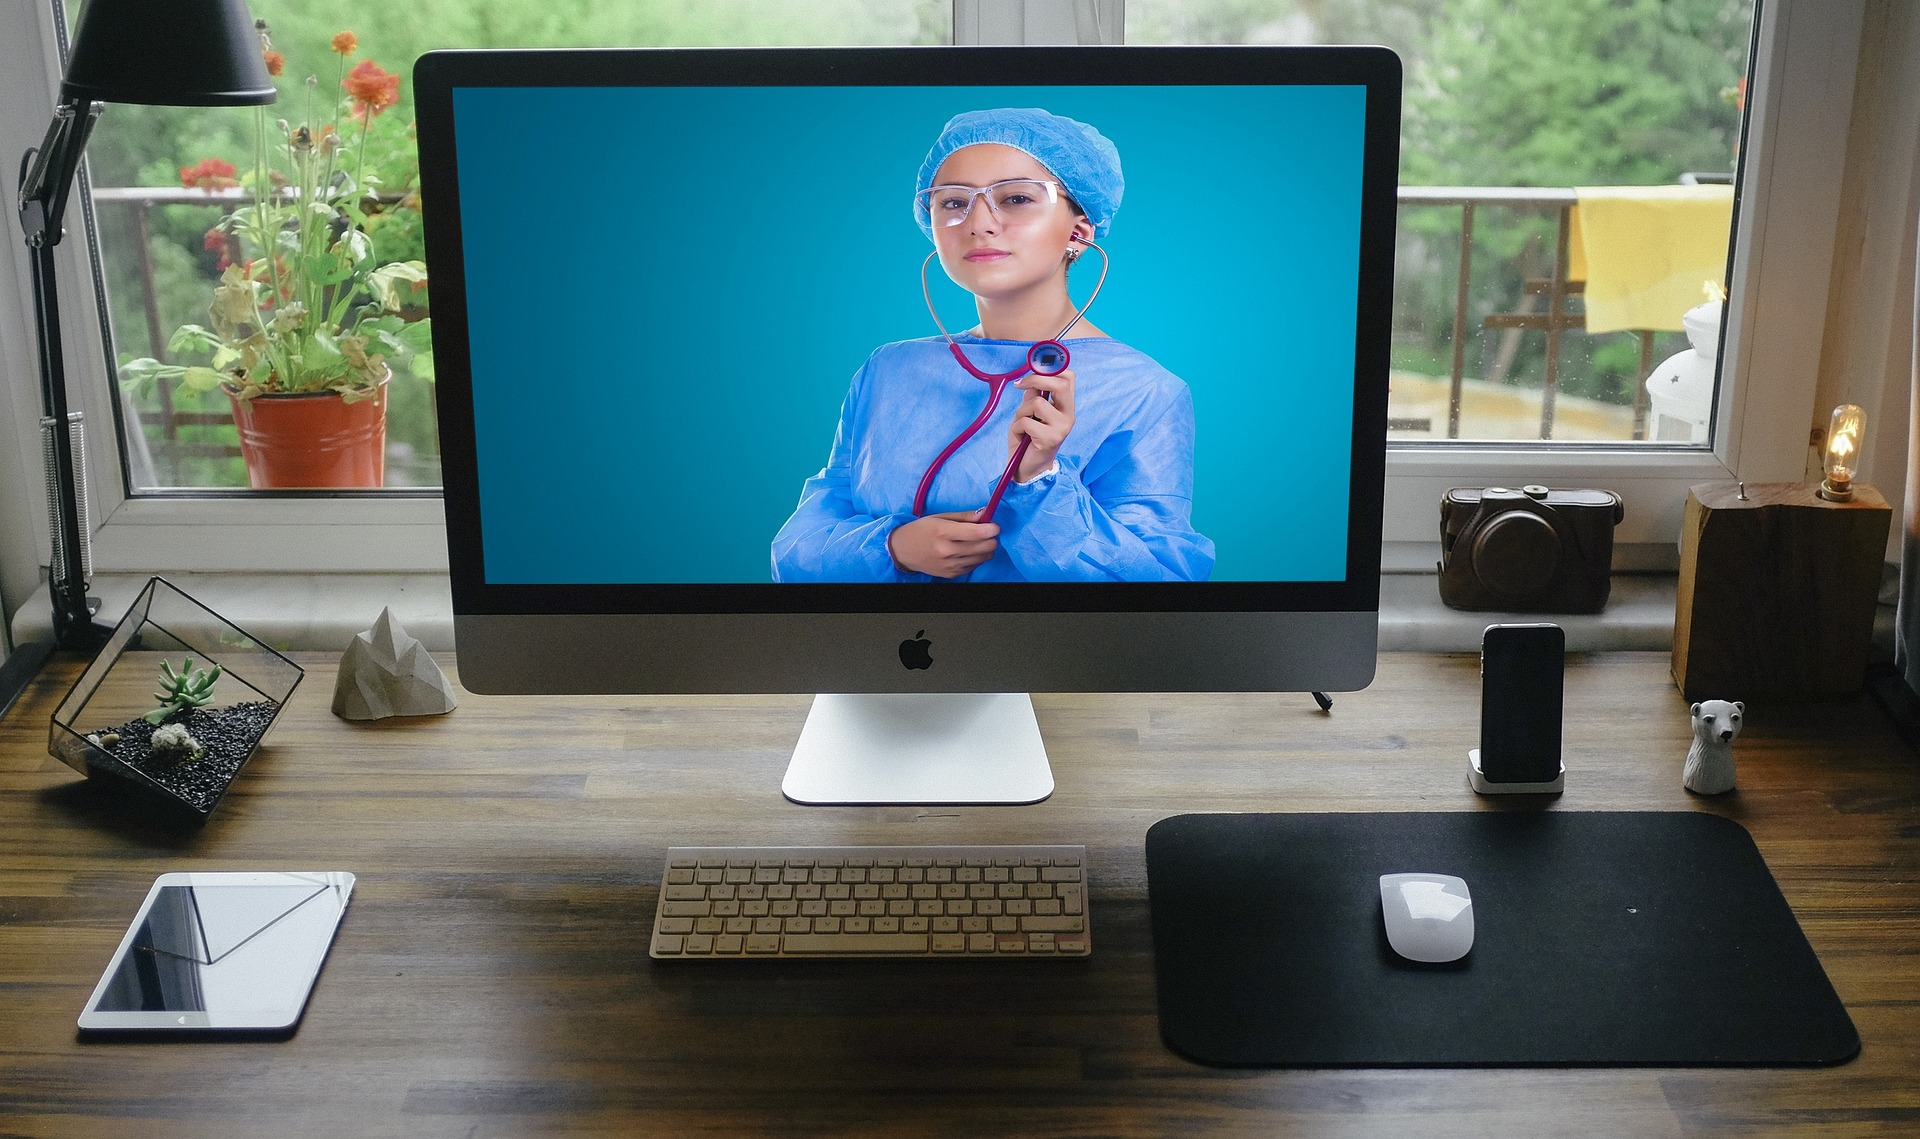 A computer monitor showing a doctor